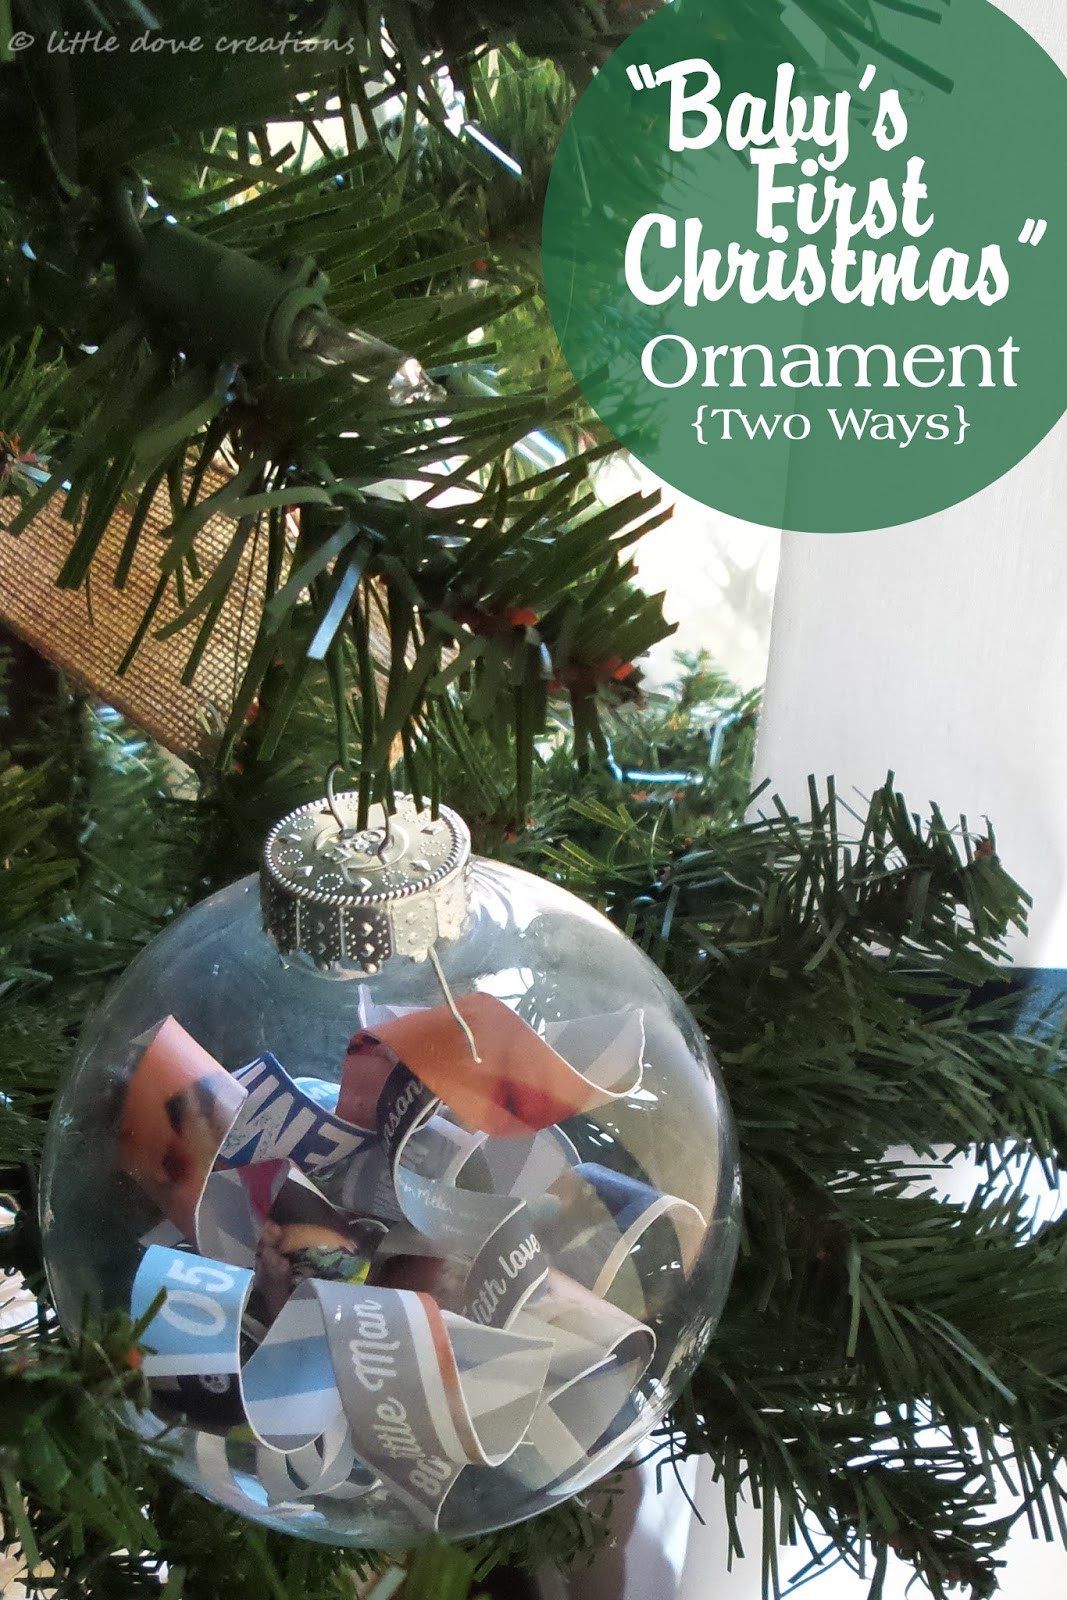 DIY Baby'S First Christmas Ornament
 diy "baby s first Christmas" ornaments Little Dove Blog